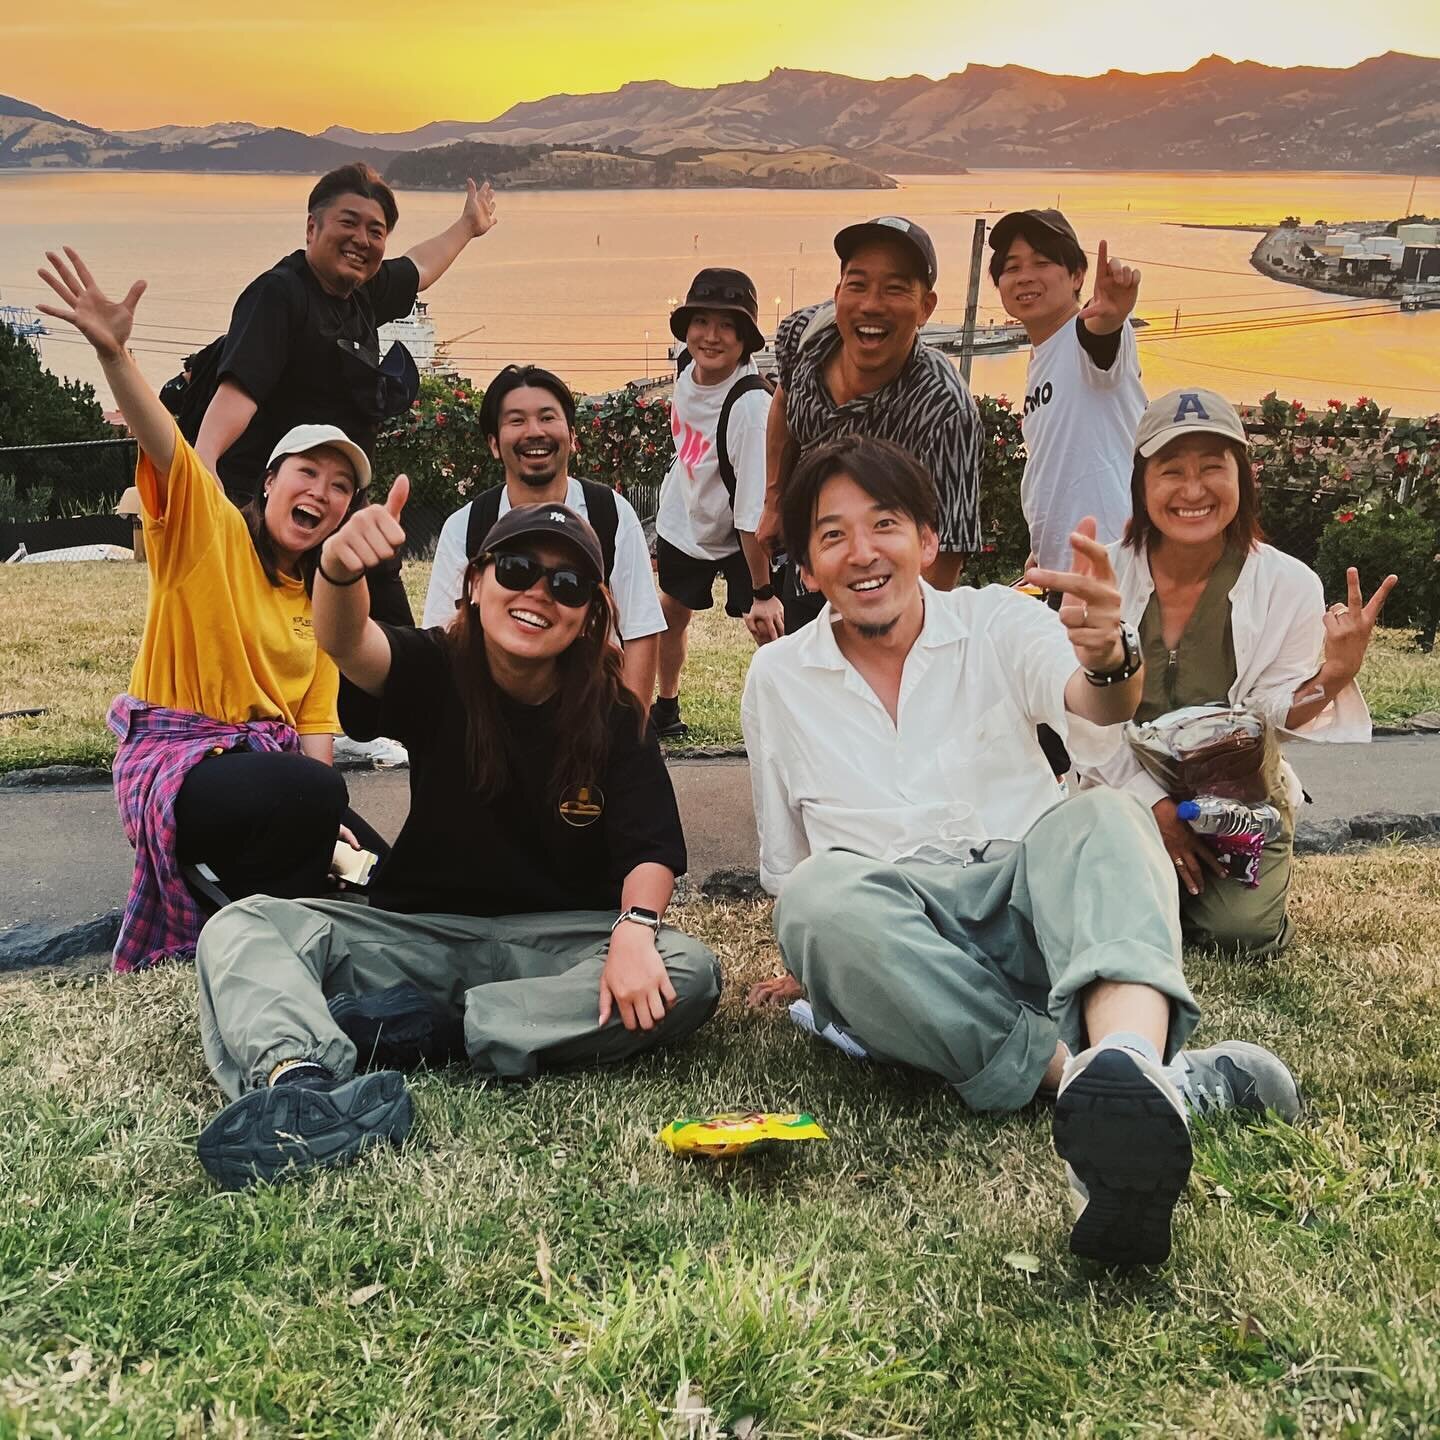 SHOOT⚡️🎥
Amazing People x
Beautiful Place = 💎🥳
.
Large Scale Projects always involve a lot of preparation and a few nerves. But with the guidance of our leader @shohei_goto and his deputy @gendesu , we got it done! 

Filmreaktor P/1AD @jonasticus 